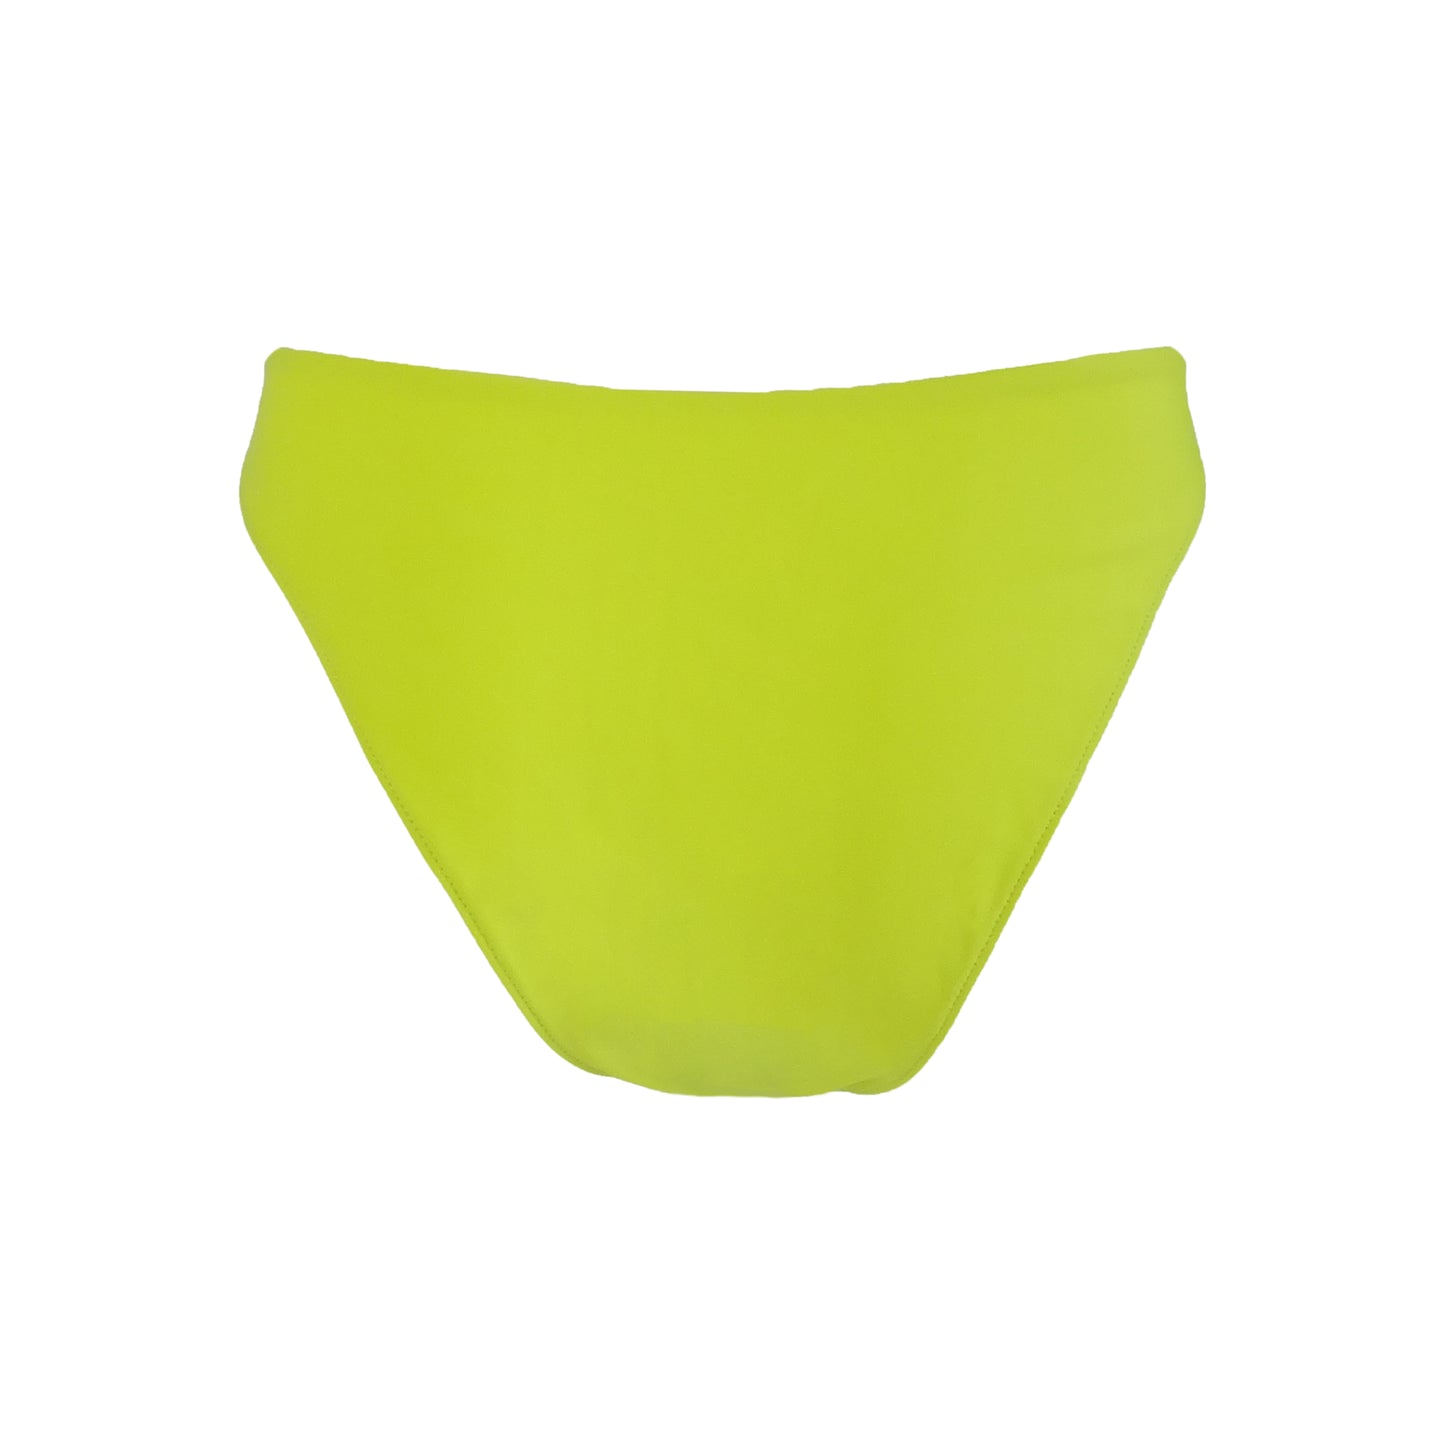 Back view of Neon Yellow v shape mid rise bikini bottom with asymmetric seam detail, high cut sides and cheeky bum coverage.